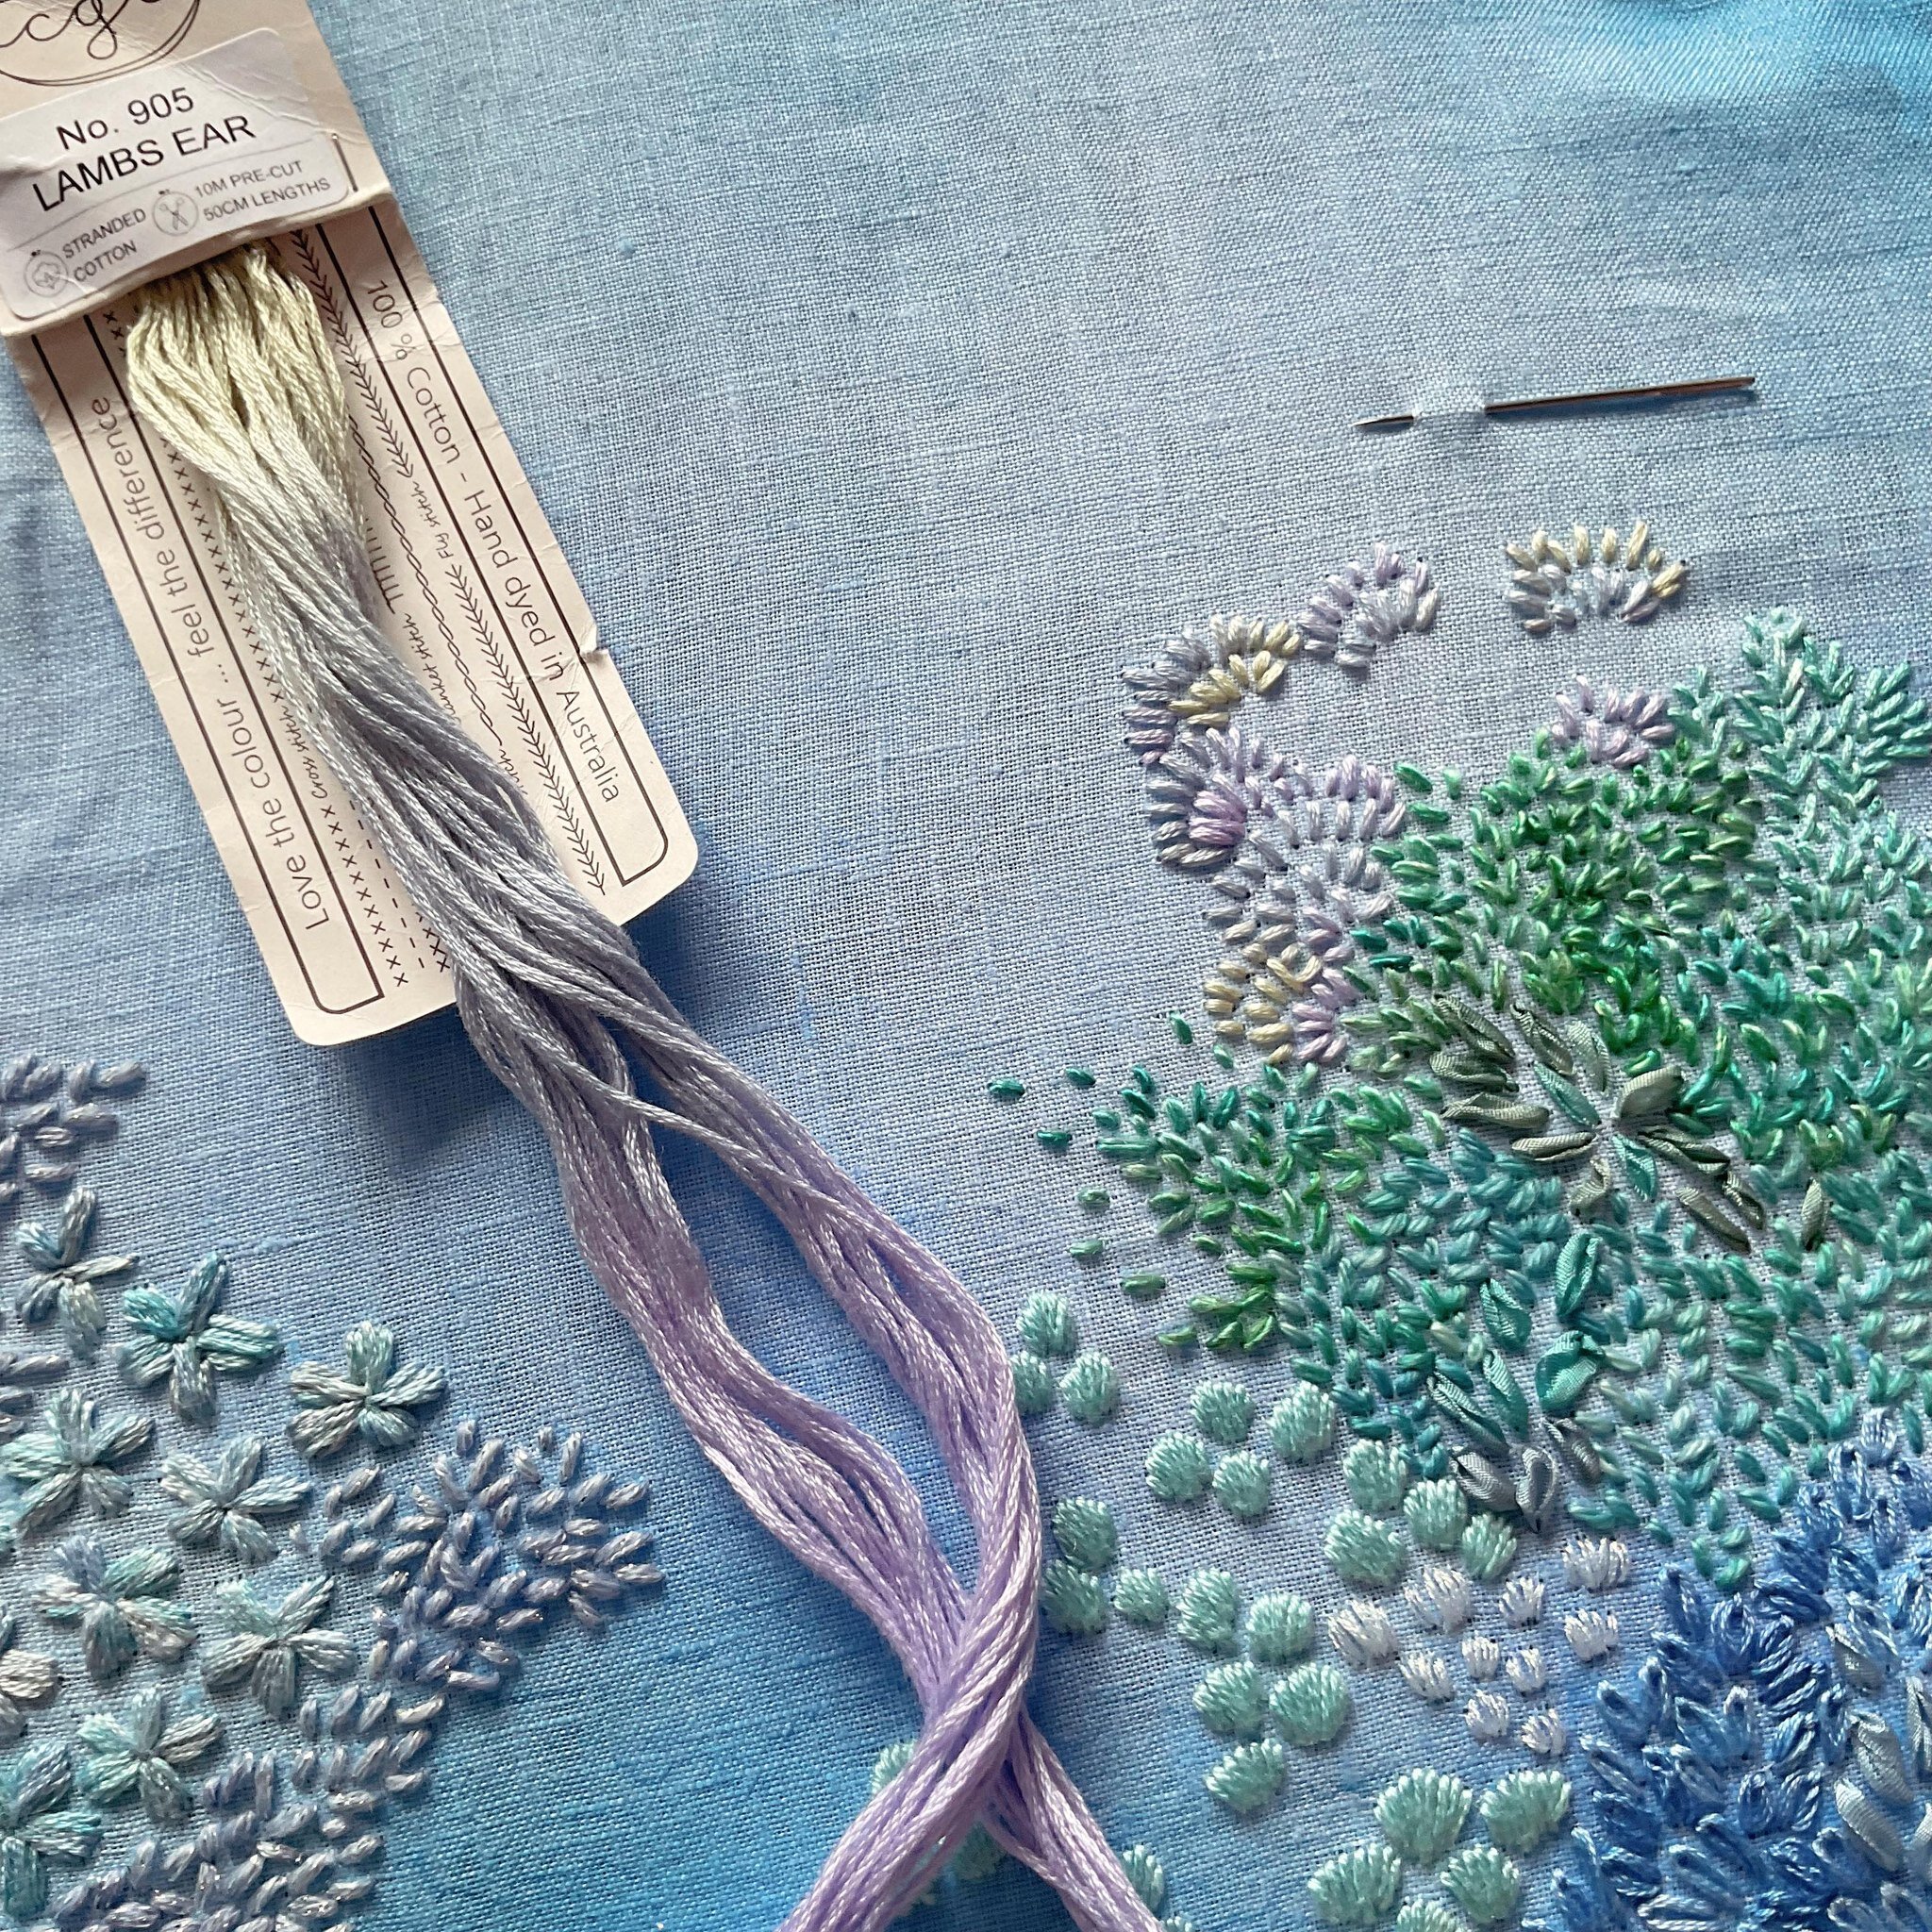 Currently obsessed with this colour, &ldquo;Lambs Ear&rdquo; from @cottagegardenthreads, So pretty, and one of my favourite variegated threads. #embroidery #embroiderythreads #hoopart #handstitching